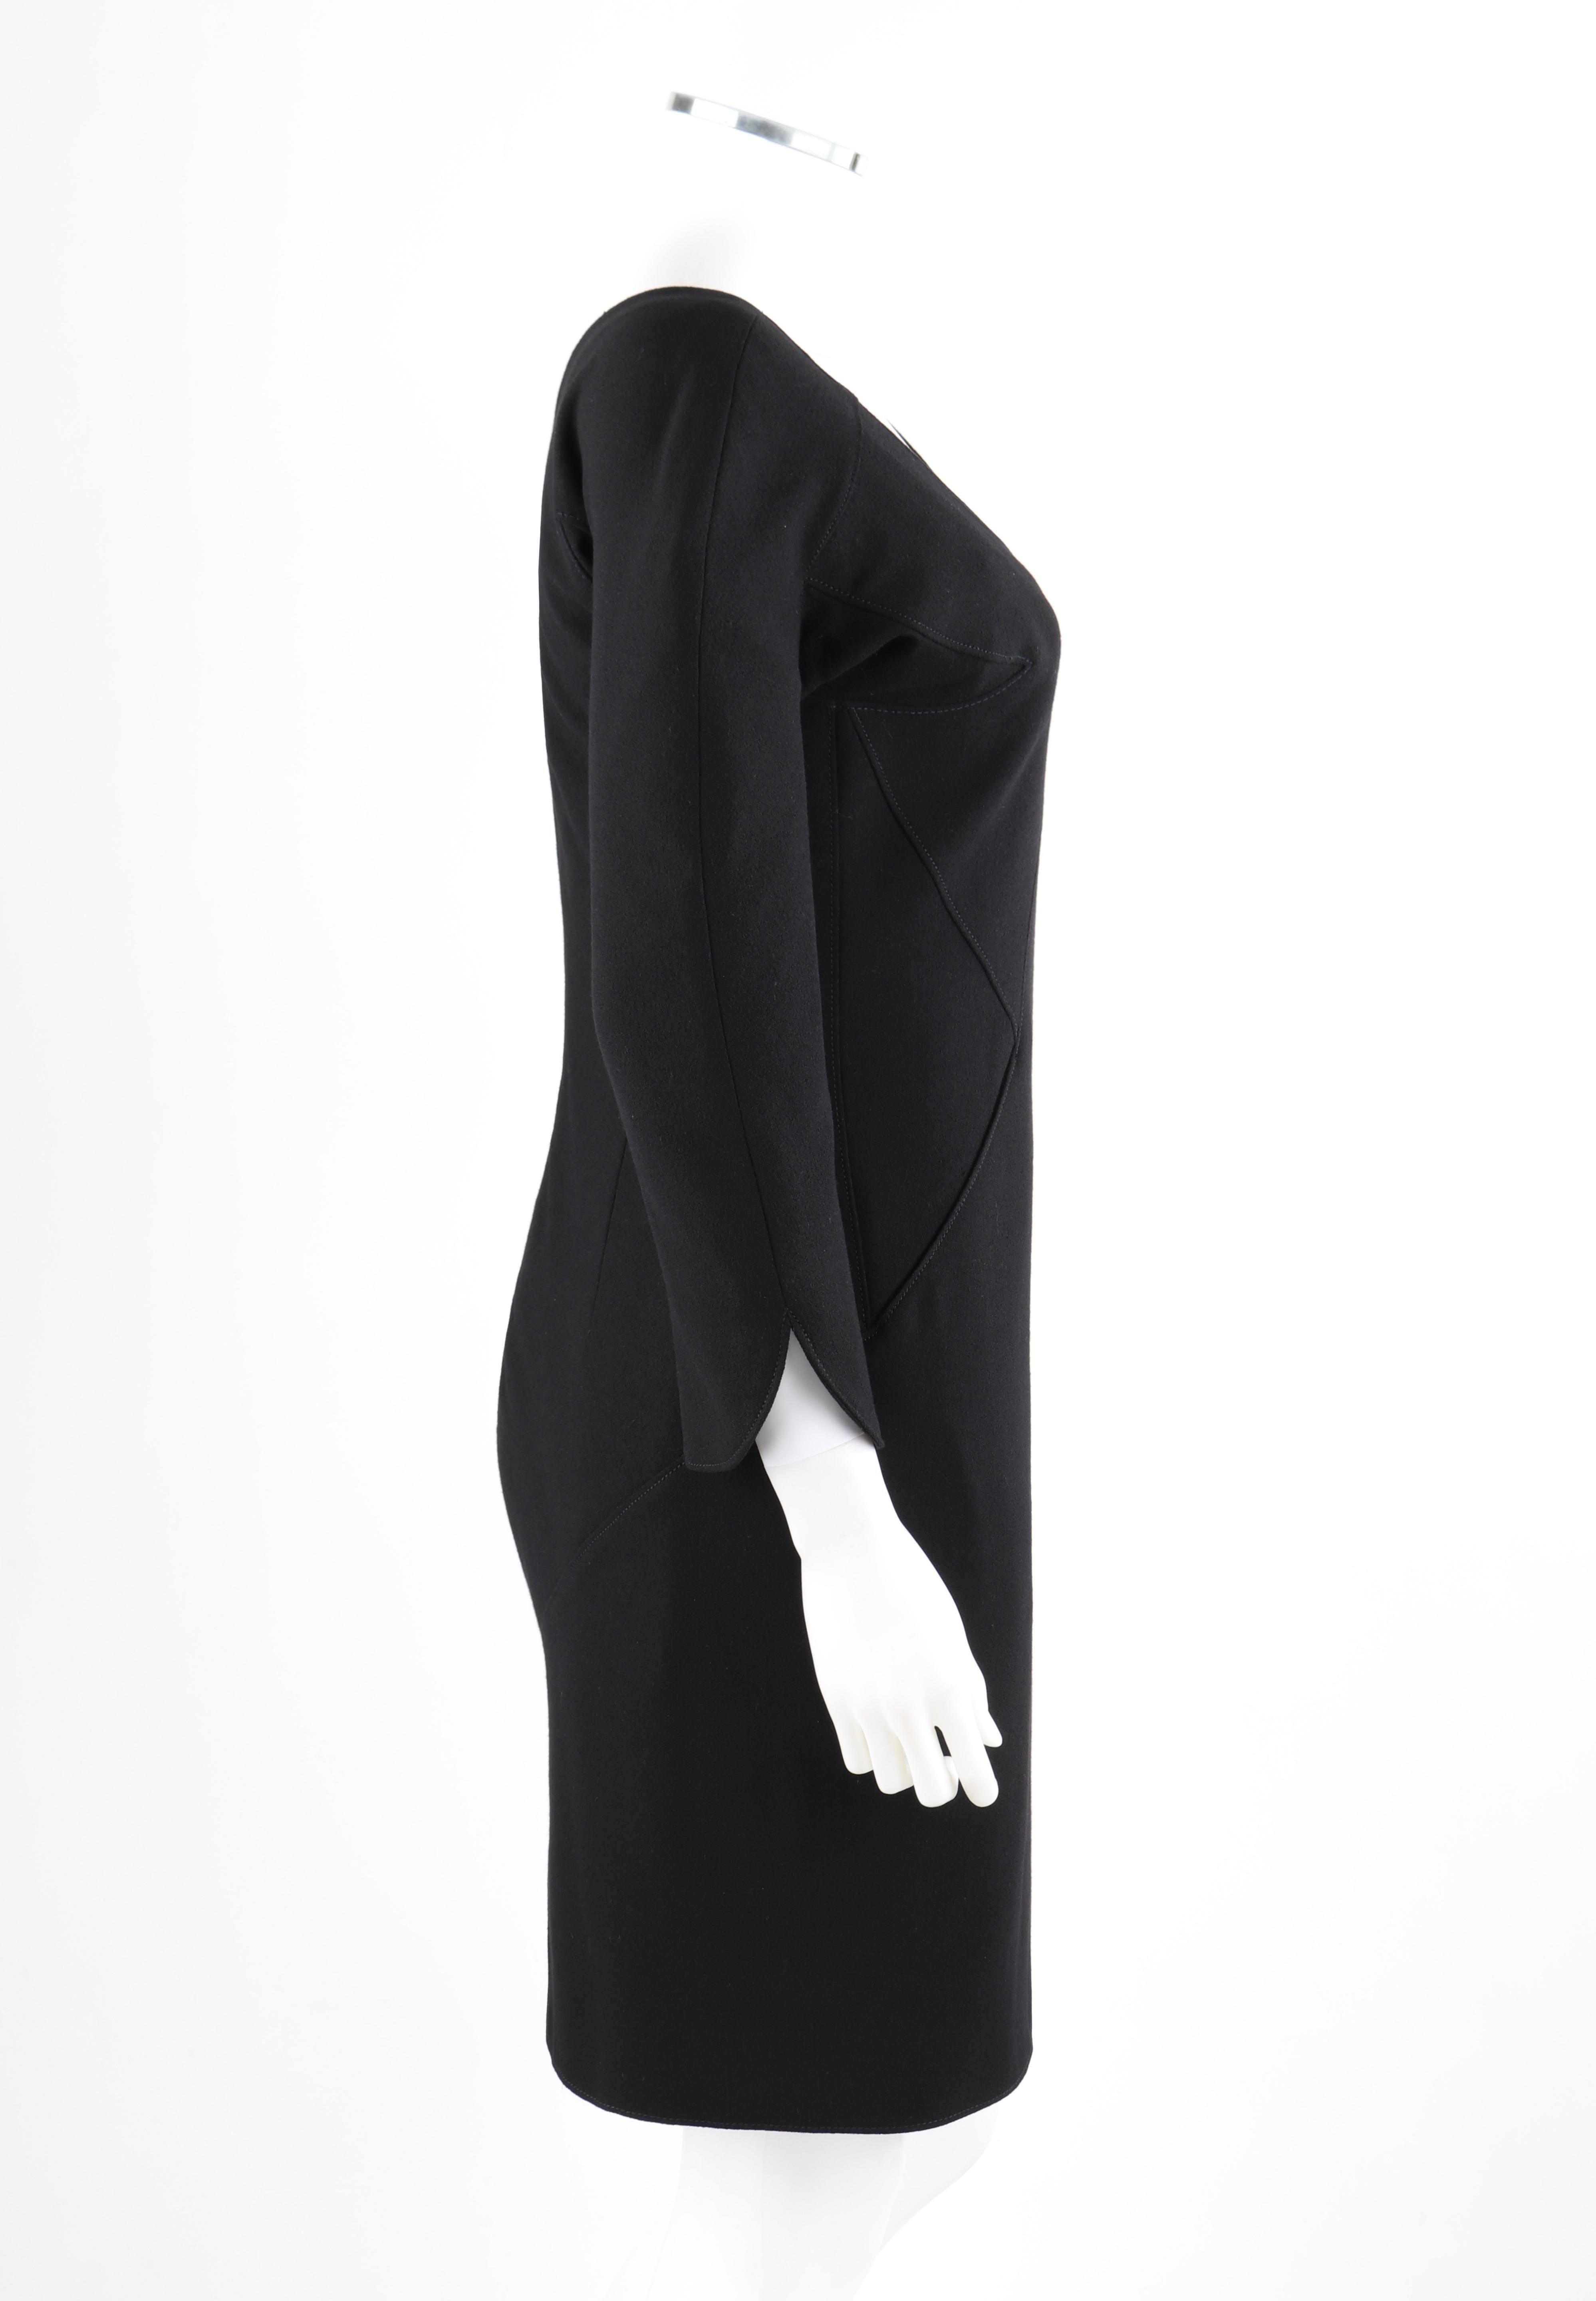 ALEXANDER McQUEEN c.2007 Black Wool Geometric Paneled V-Neck Cocktail Dress In Good Condition For Sale In Thiensville, WI